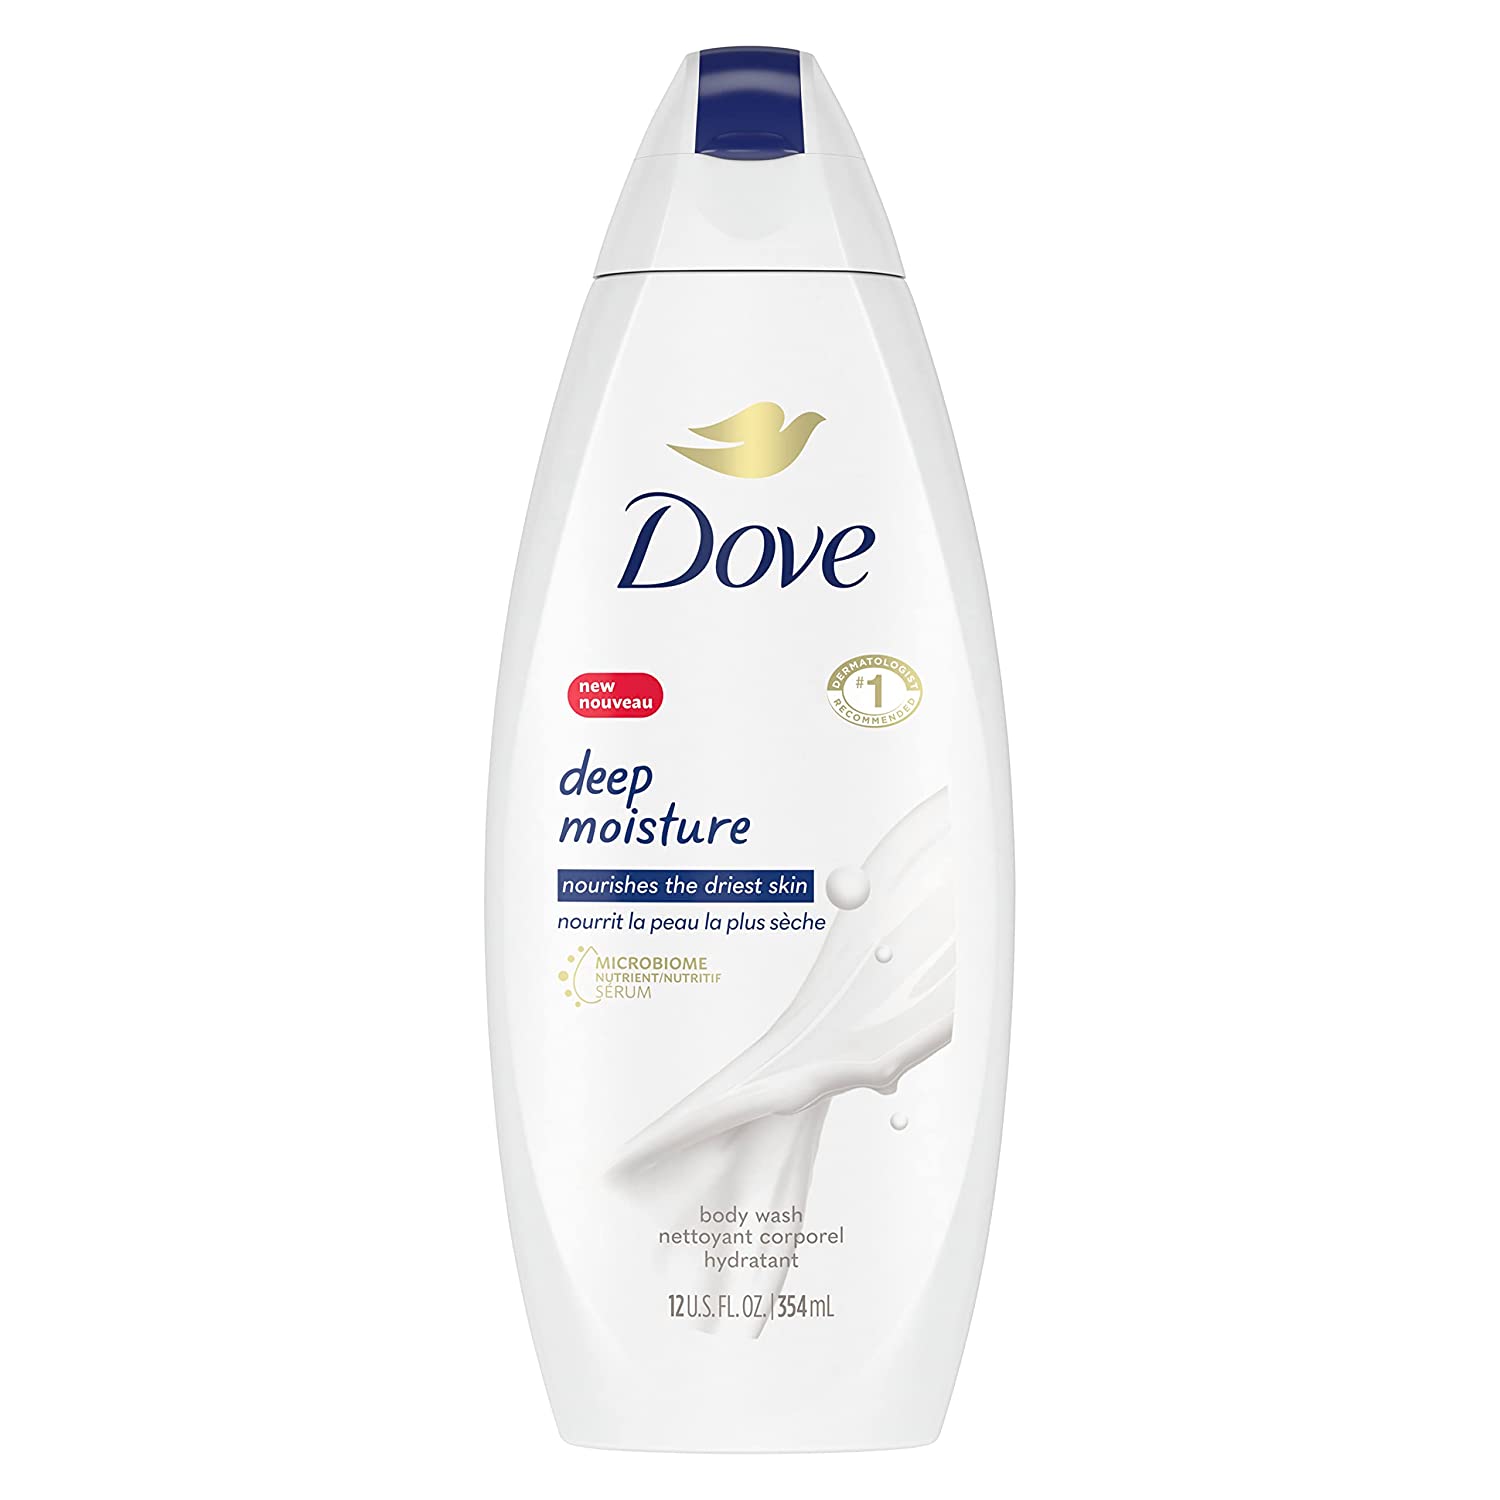 Dove Deep Moisture Cleanser with Skin Natural Nourishers for Instantly Soft Skin - 12 Fl.Oz (345ml)